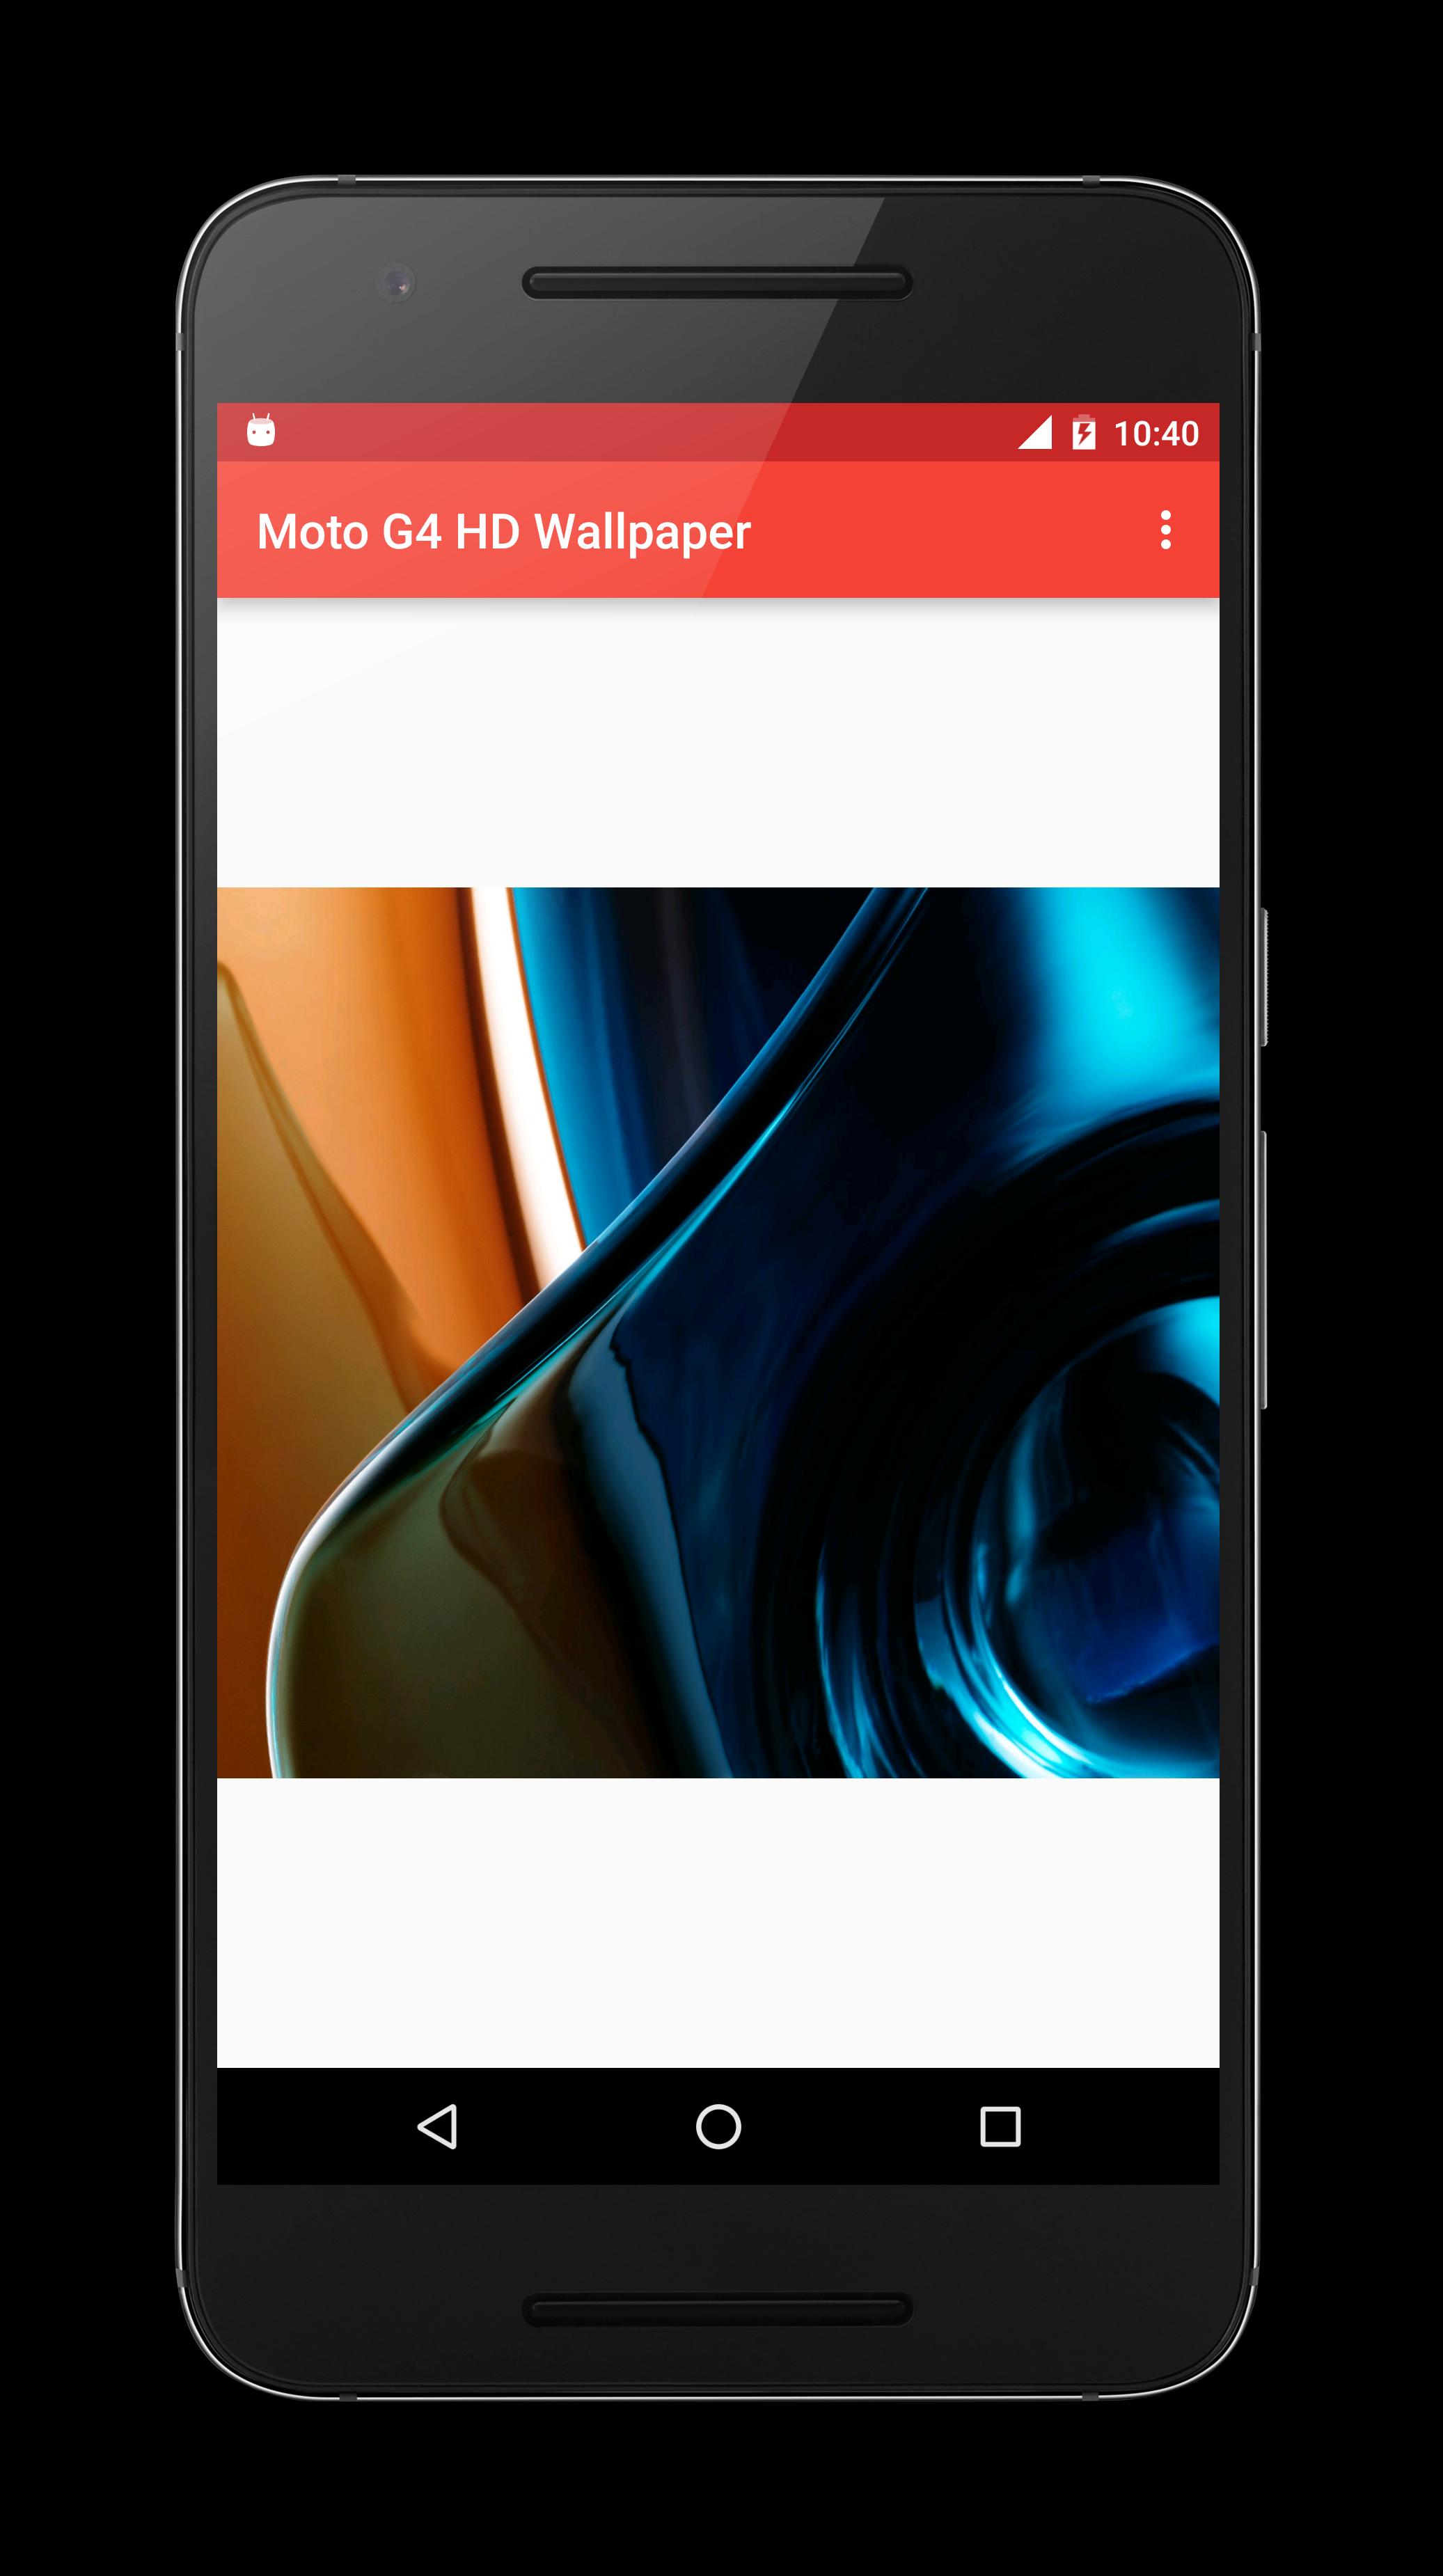 Moto G4 HD Wallpaper for Android - APK Download